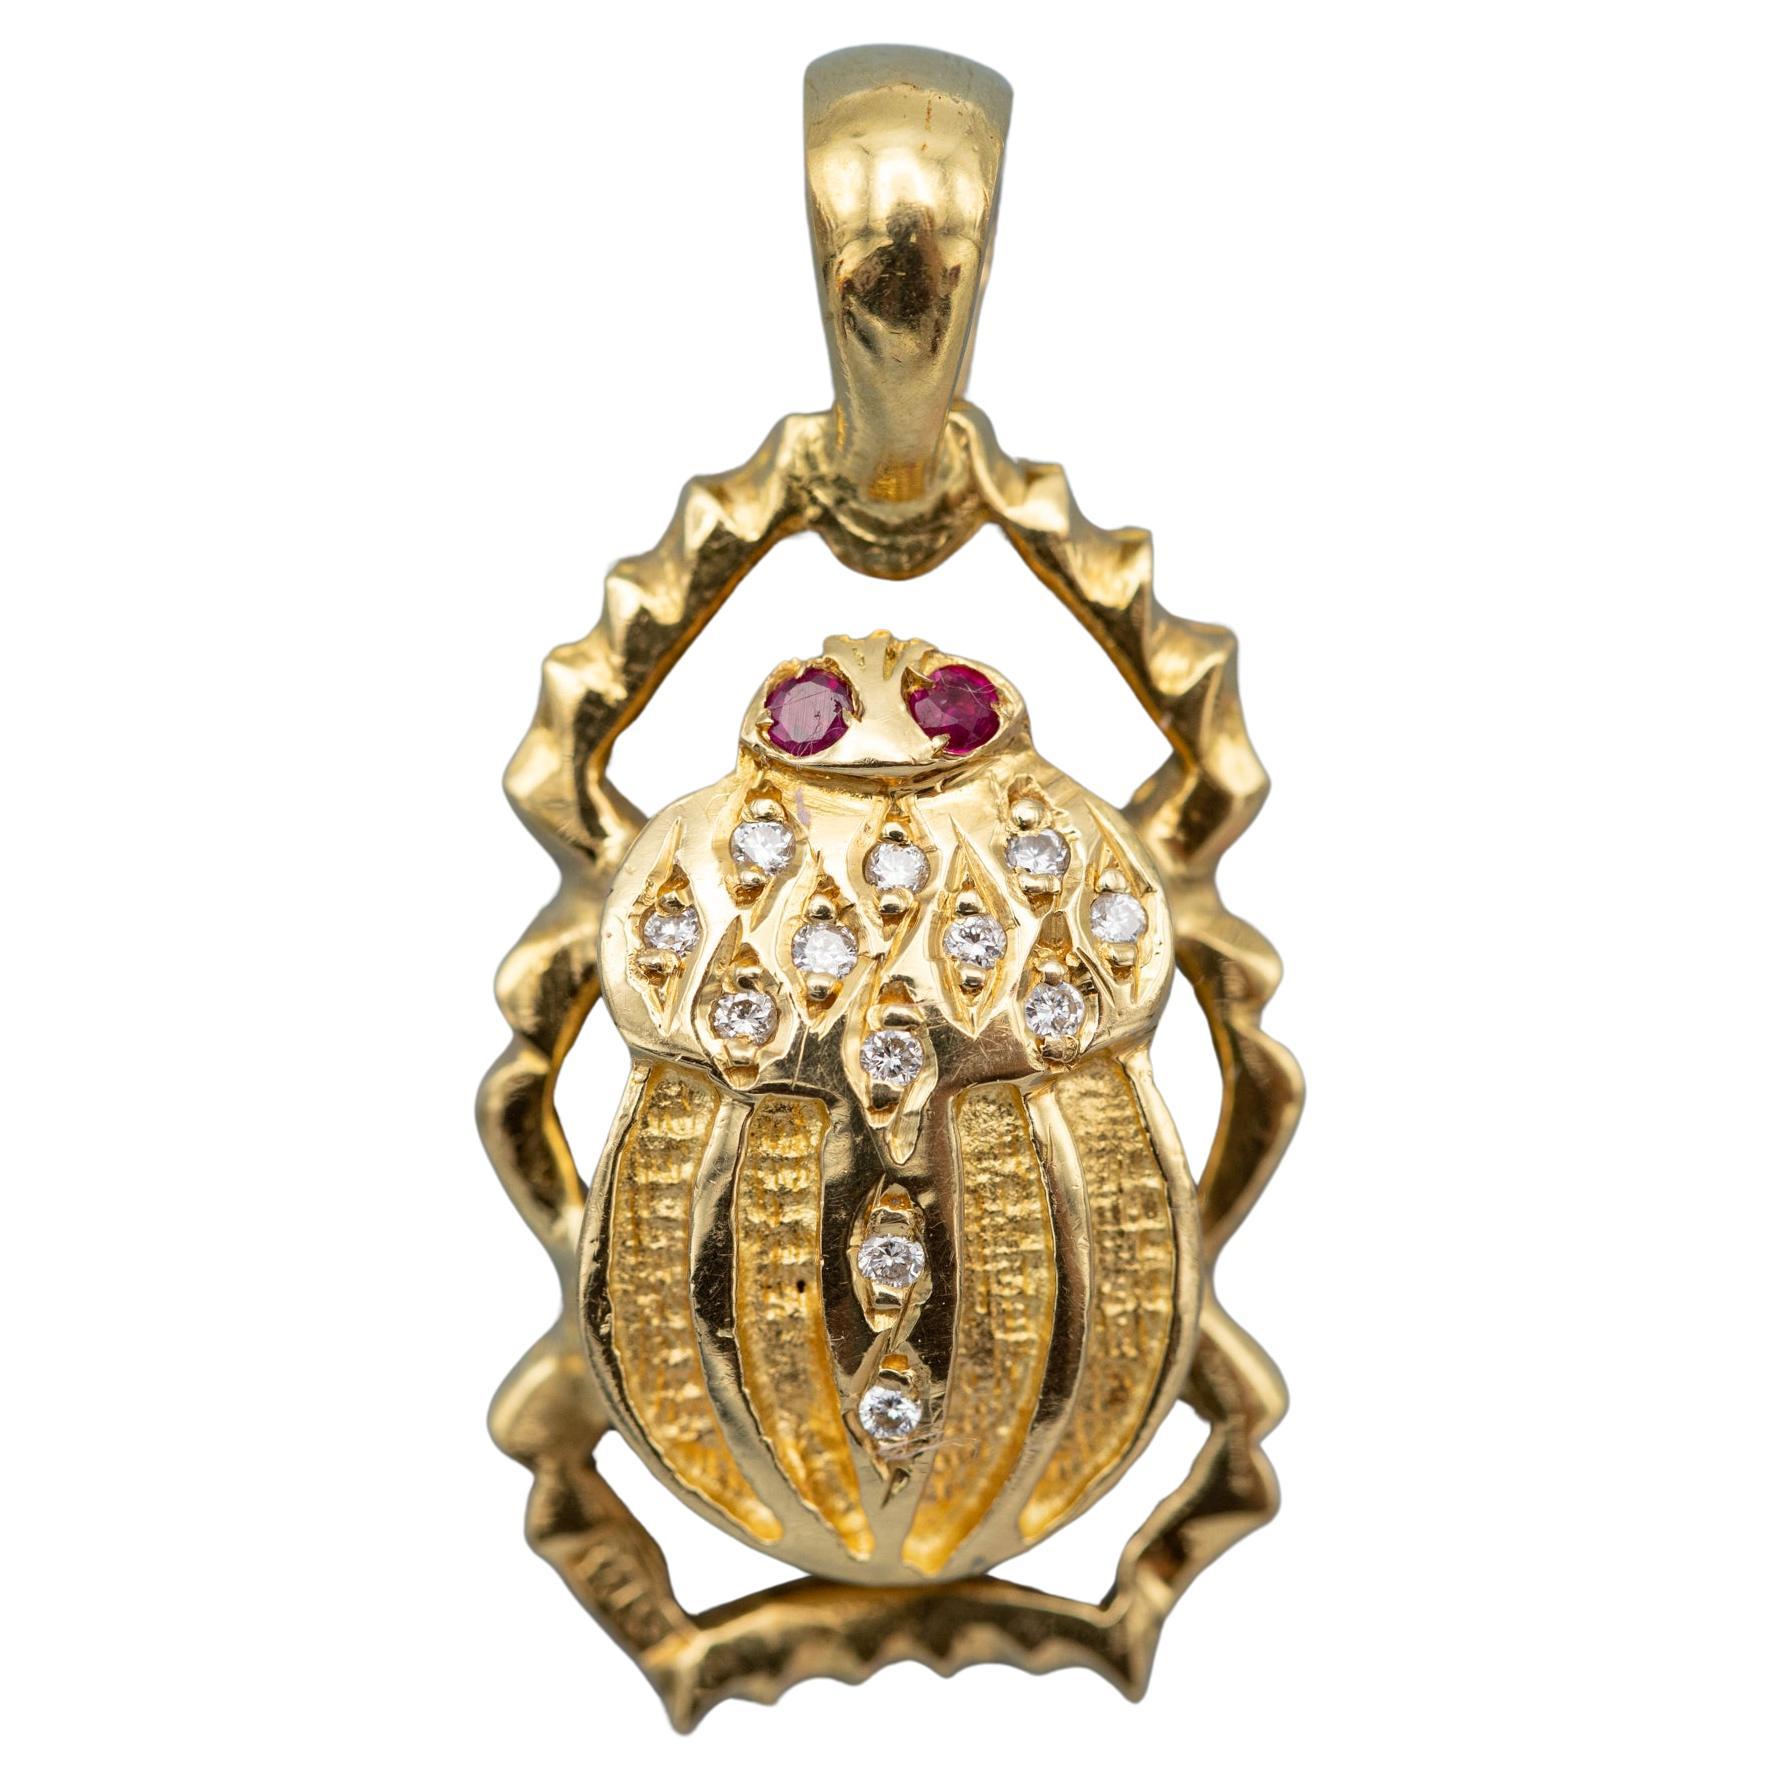 18K solid gold Egyptian scarab charm - good luck amulet - Lucky beetle pendant 